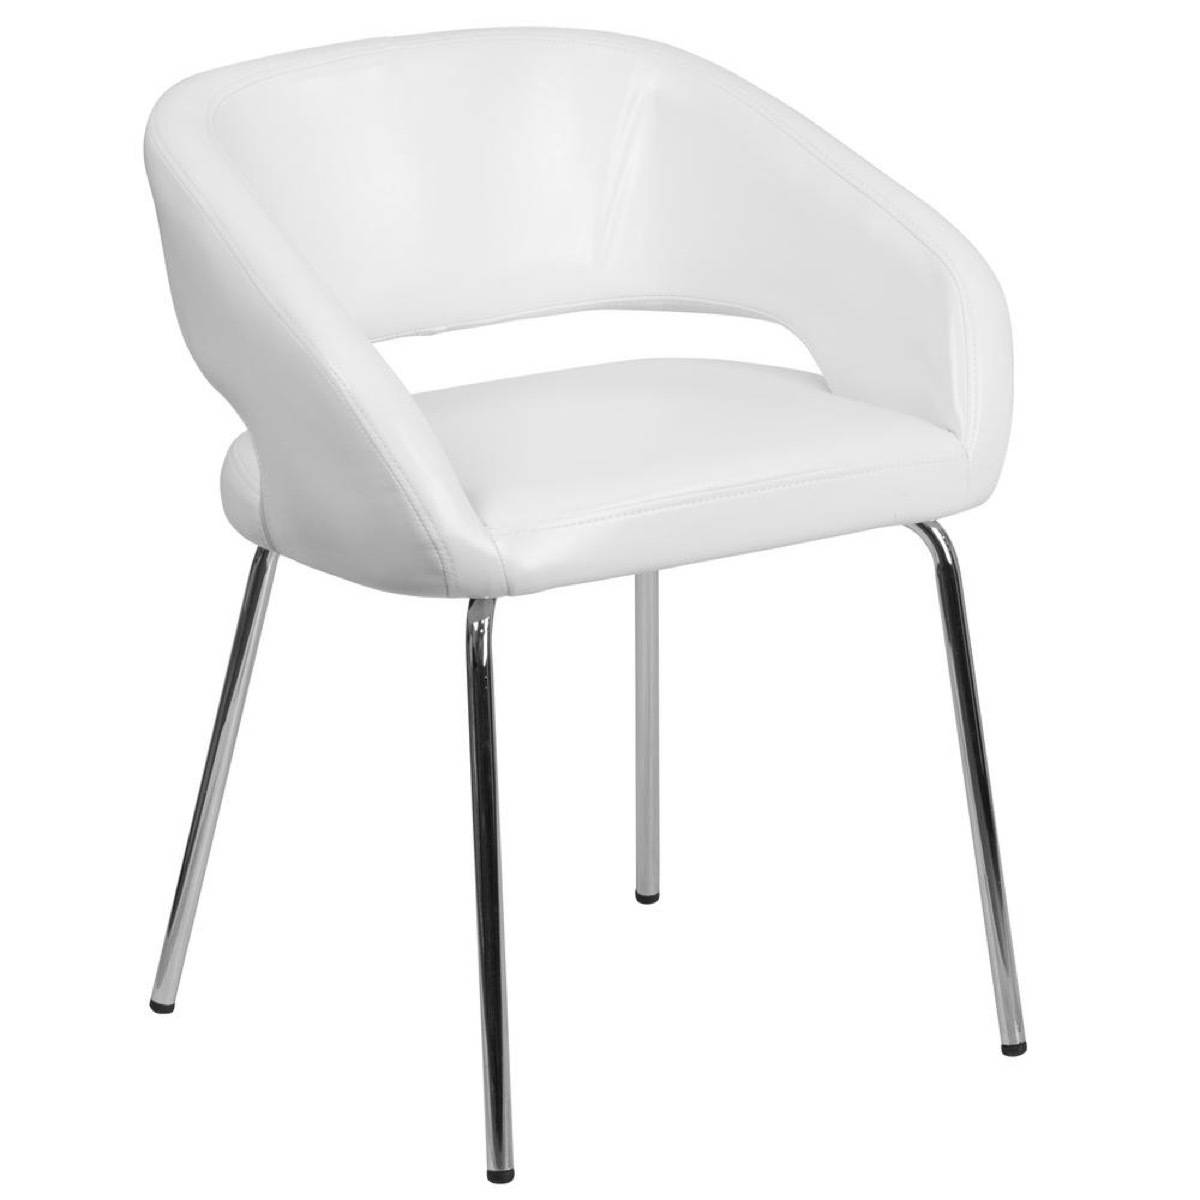 Contemporary leather side chair from The Home Depot